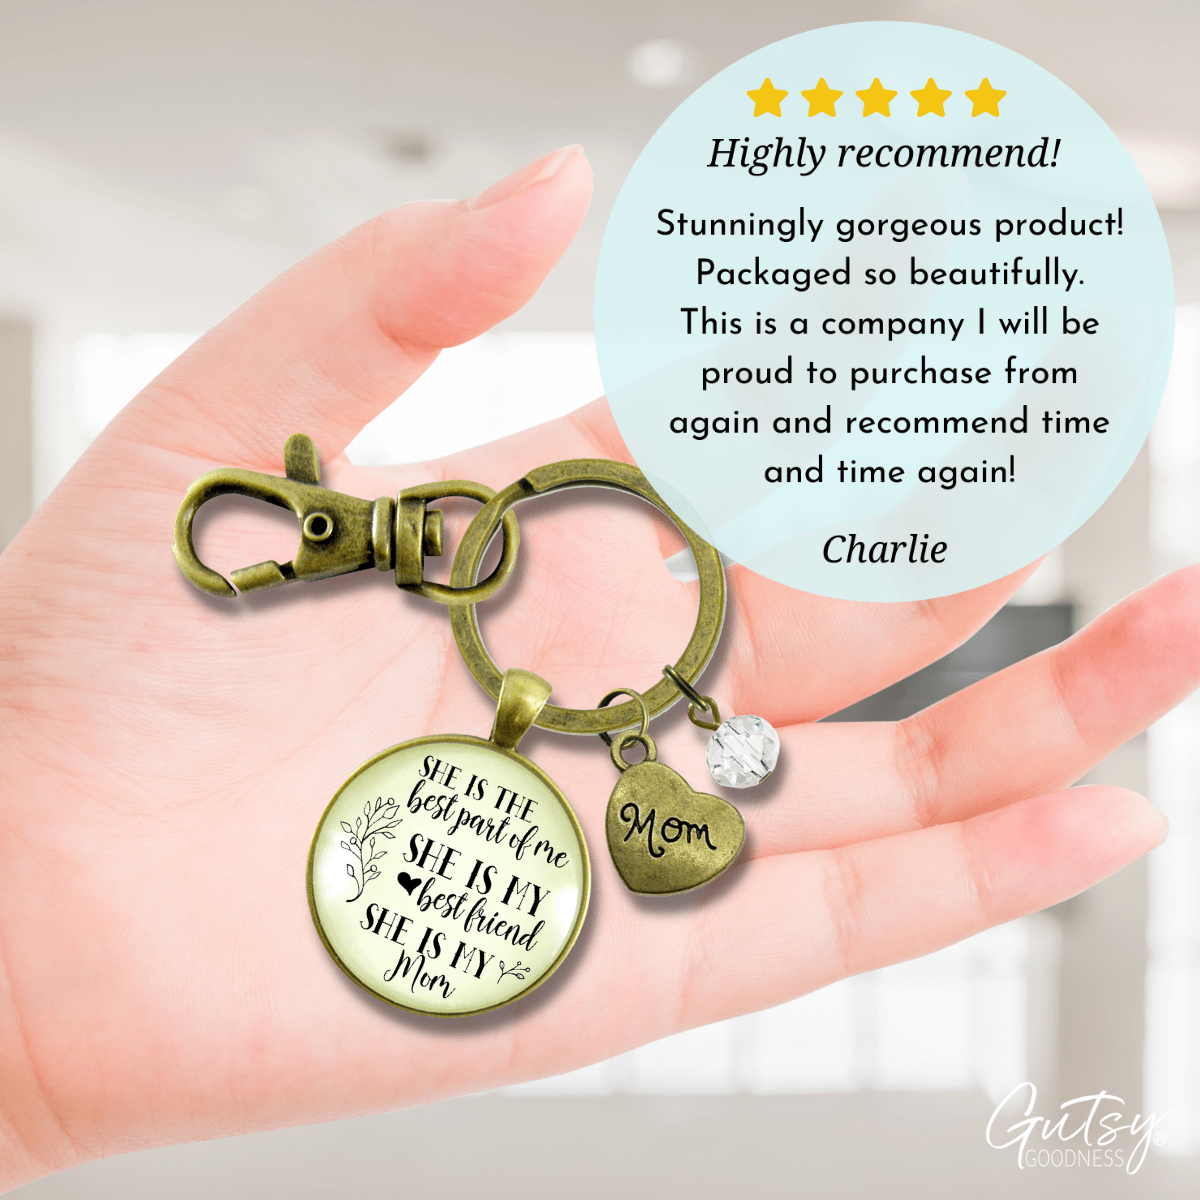 To Mother From Daughter Keychain Best Part of Me Handmade Jewelry Gift Heart Charm - Gutsy Goodness Handmade Jewelry;To Mother From Daughter Keychain Best Part Of Me Handmade Jewelry Gift Heart Charm - Gutsy Goodness Handmade Jewelry Gifts